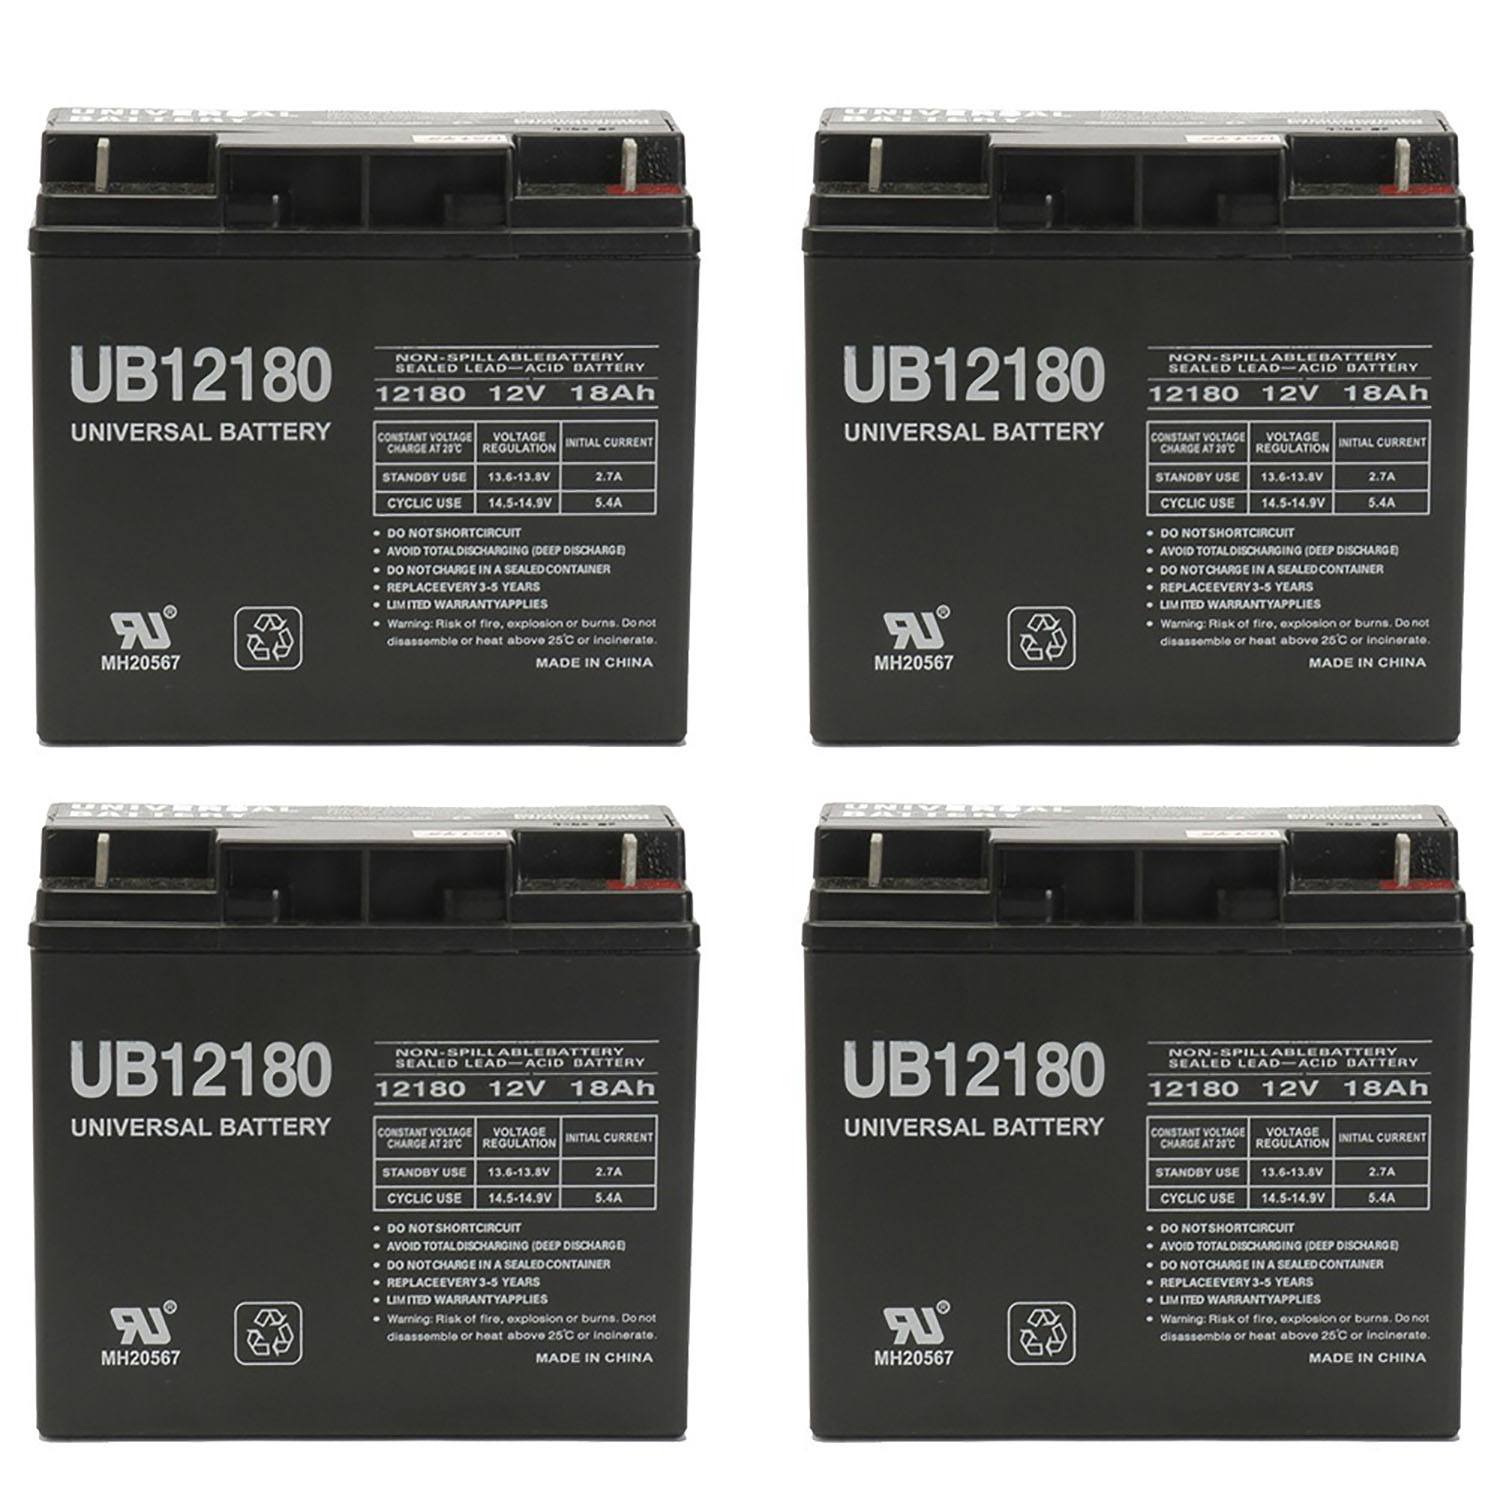 12V 18AH SLA Replacement Battery Compatible with Universal UB12180 -UB12180 - 4 Pack